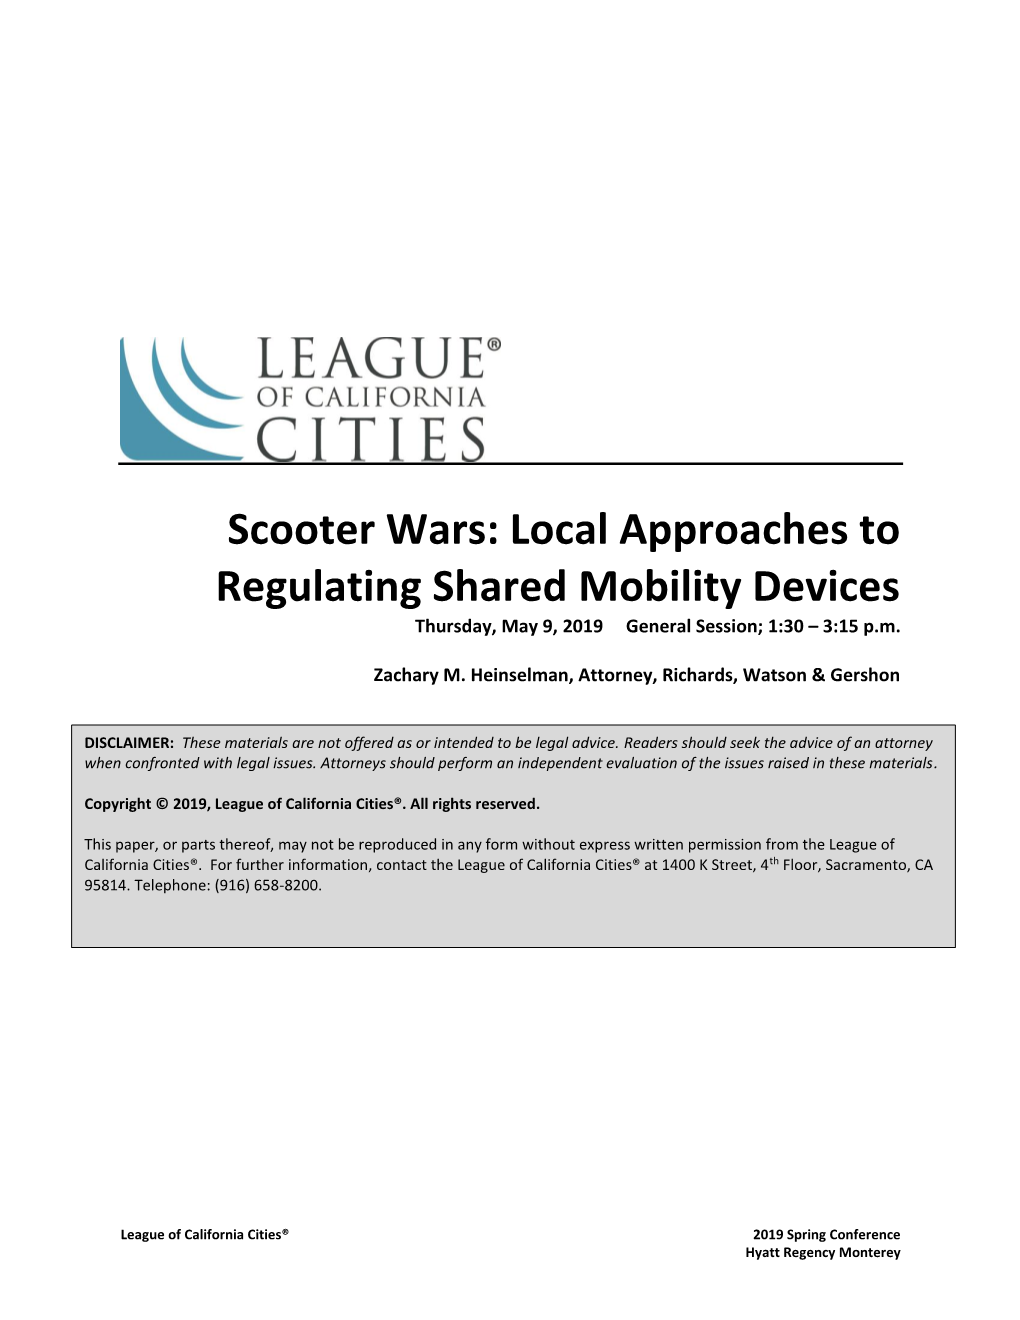 Scooter Wars: Local Approaches to Regulating Shared Mobility Devices Thursday, May 9, 2019 General Session; 1:30 – 3:15 P.M